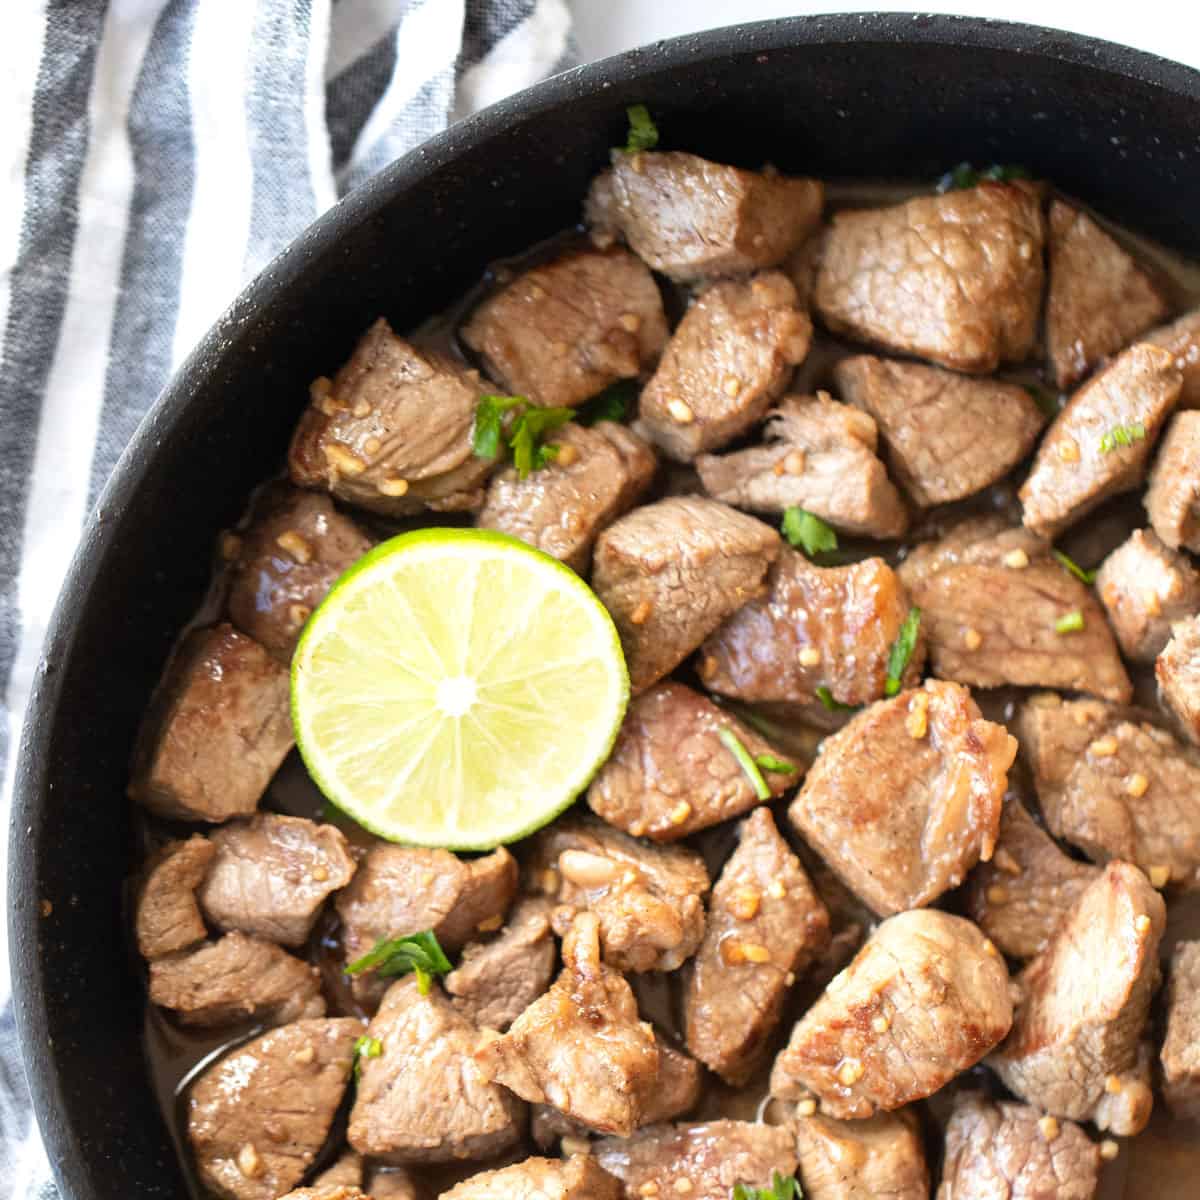 These chili lime steak bites with a lime wedge